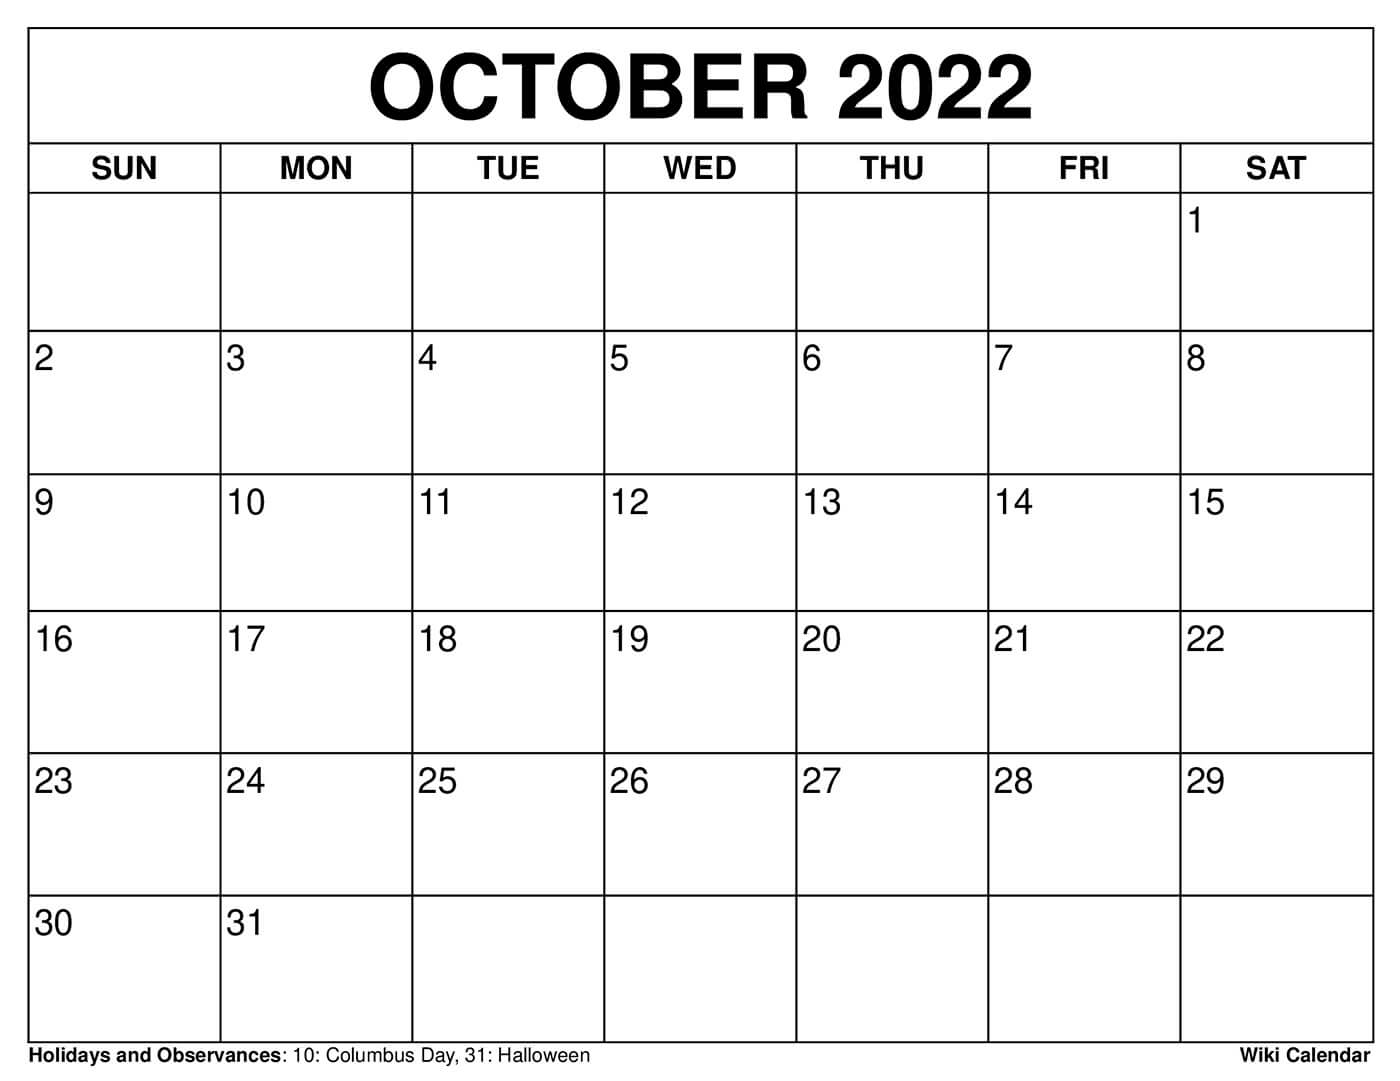 October 2022 Printable Calendar With Holidays Free Printable October 2022 Calendars - Wiki Calendar